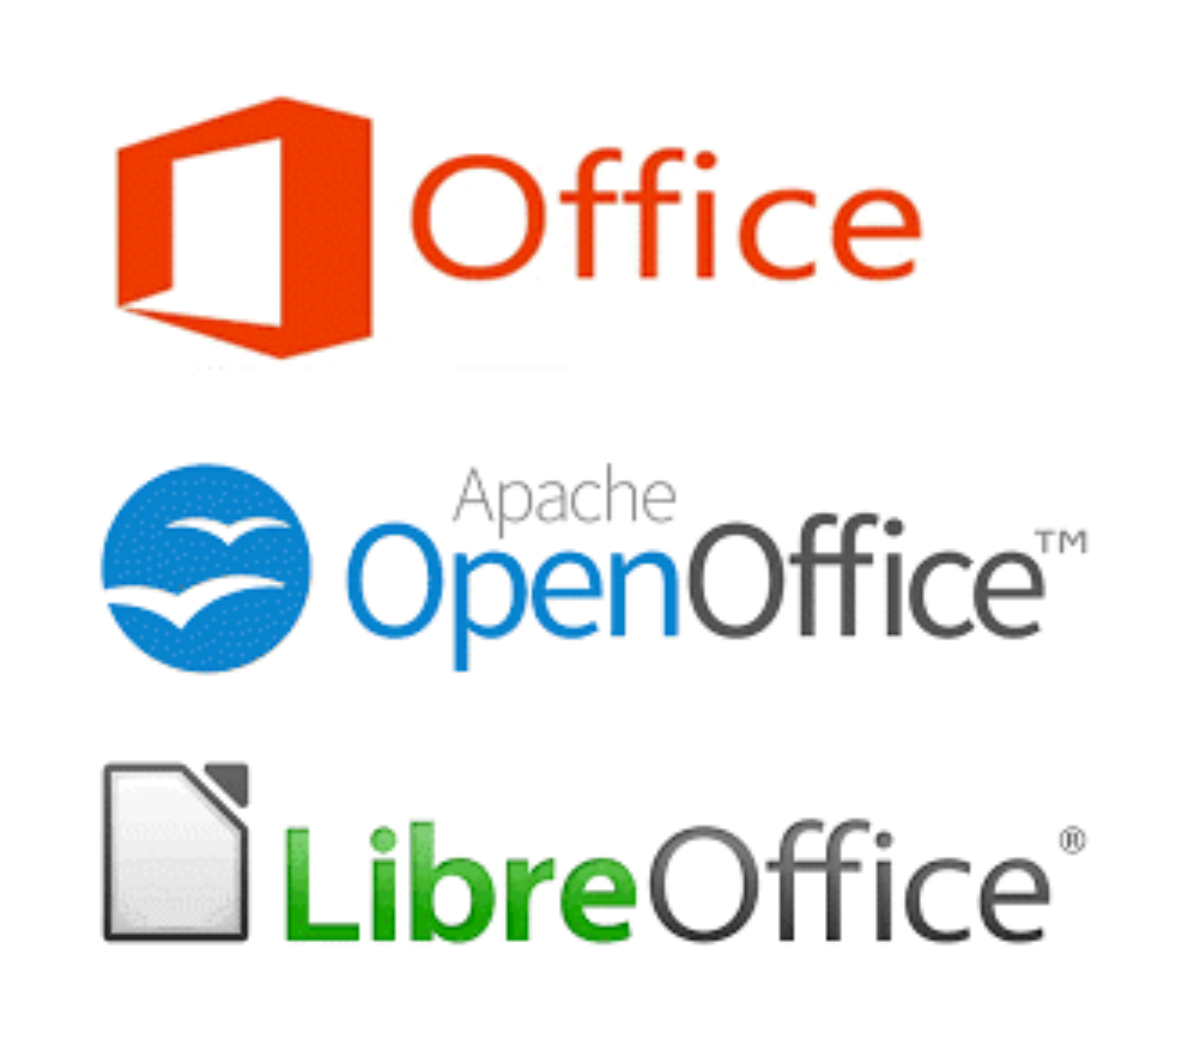 Open office libre download